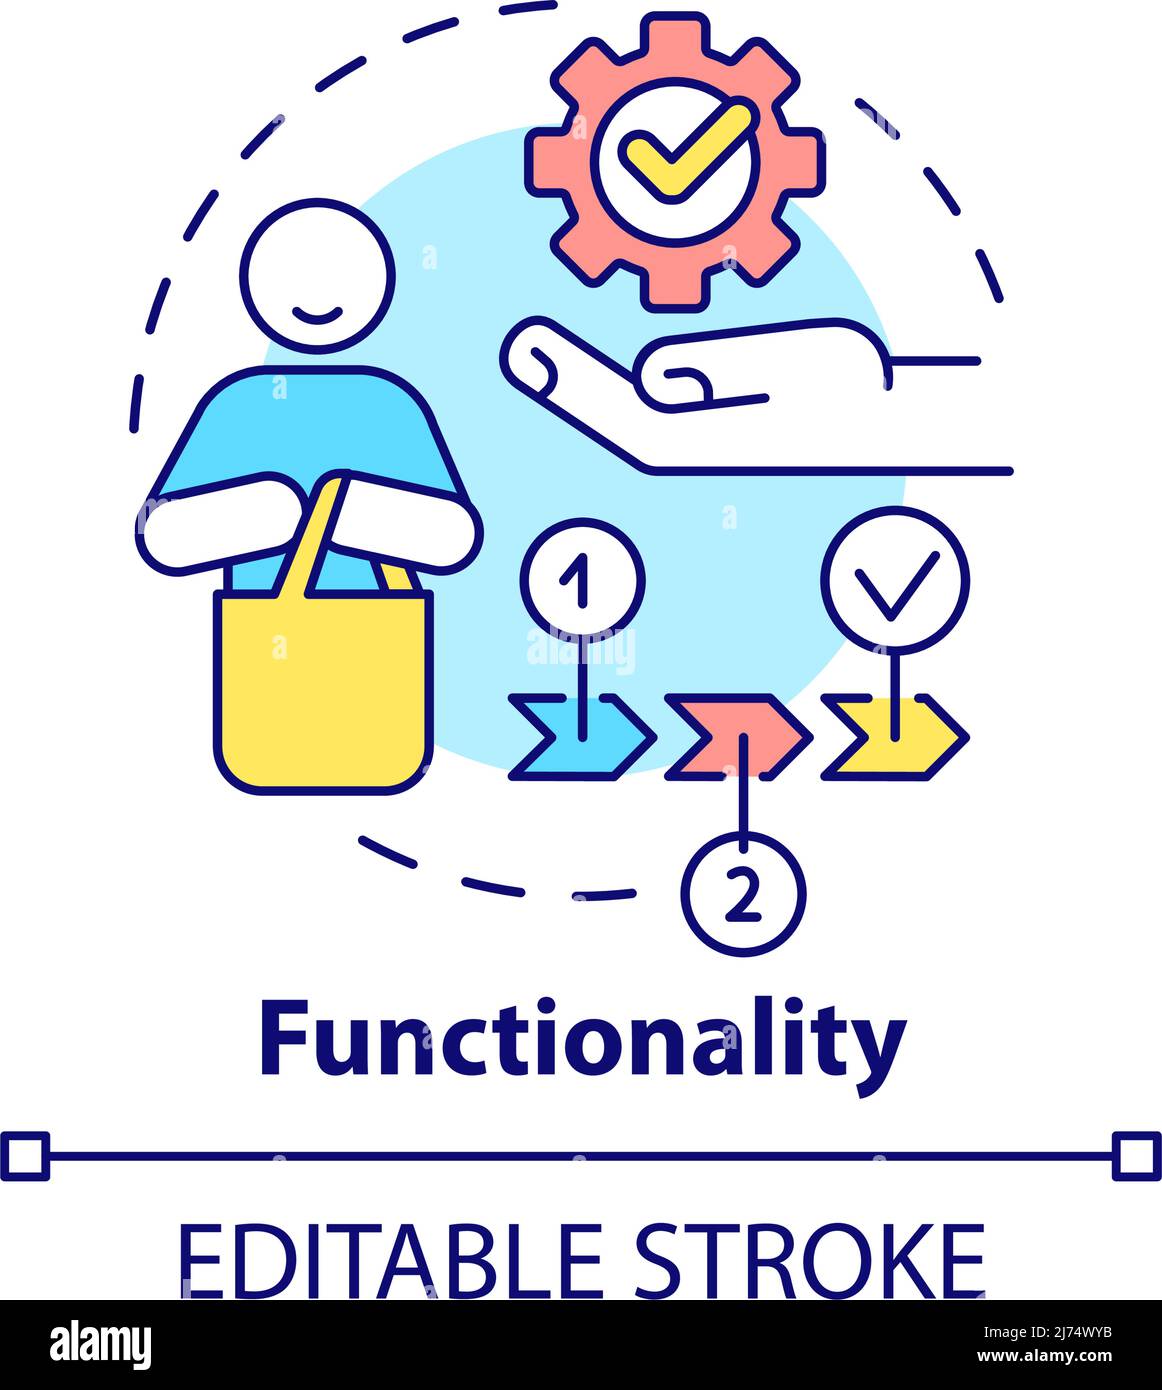 Functionality concept icon Stock Vector